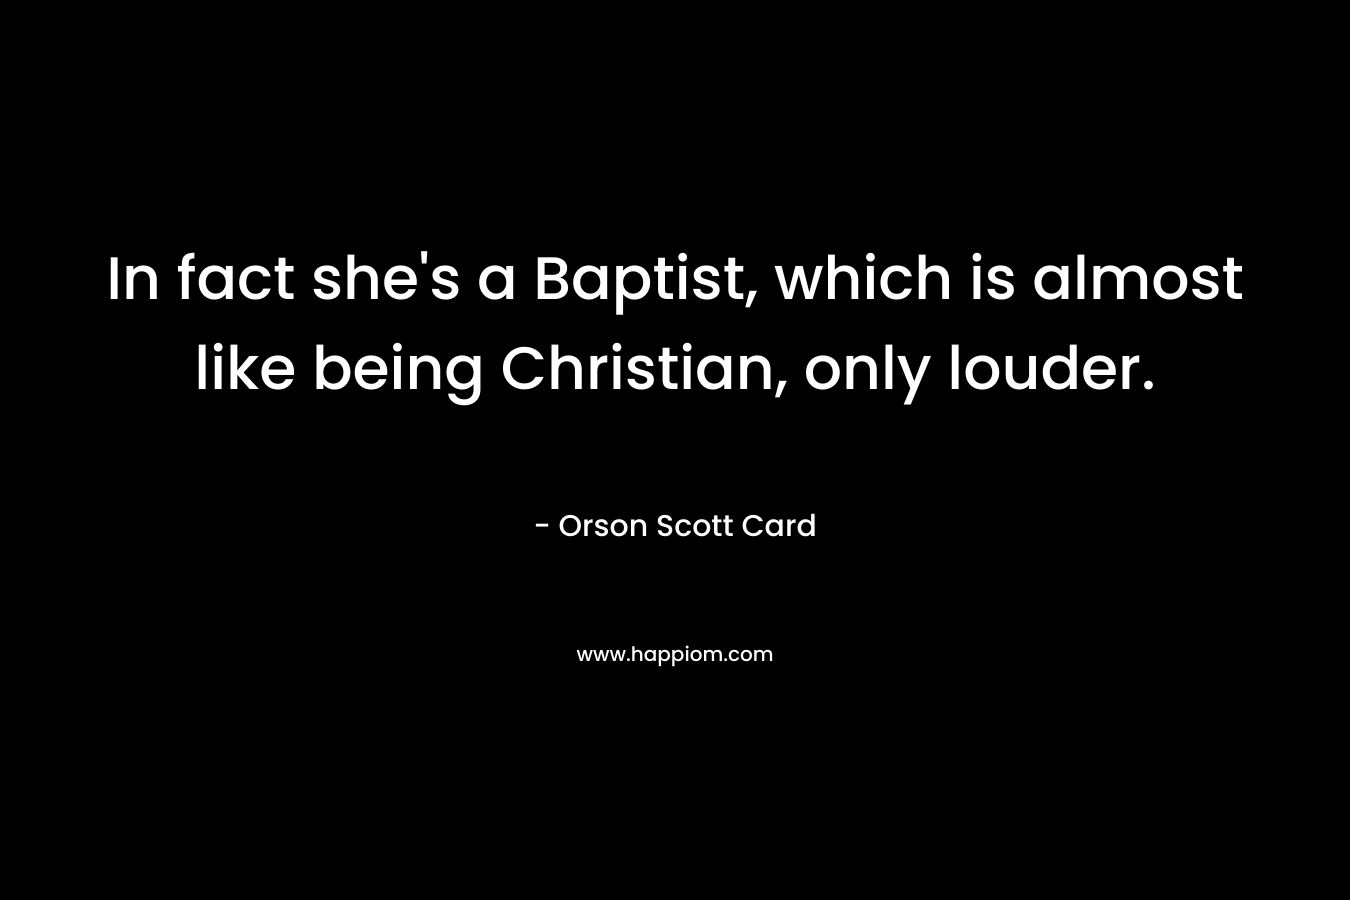 In fact she’s a Baptist, which is almost like being Christian, only louder. – Orson Scott Card